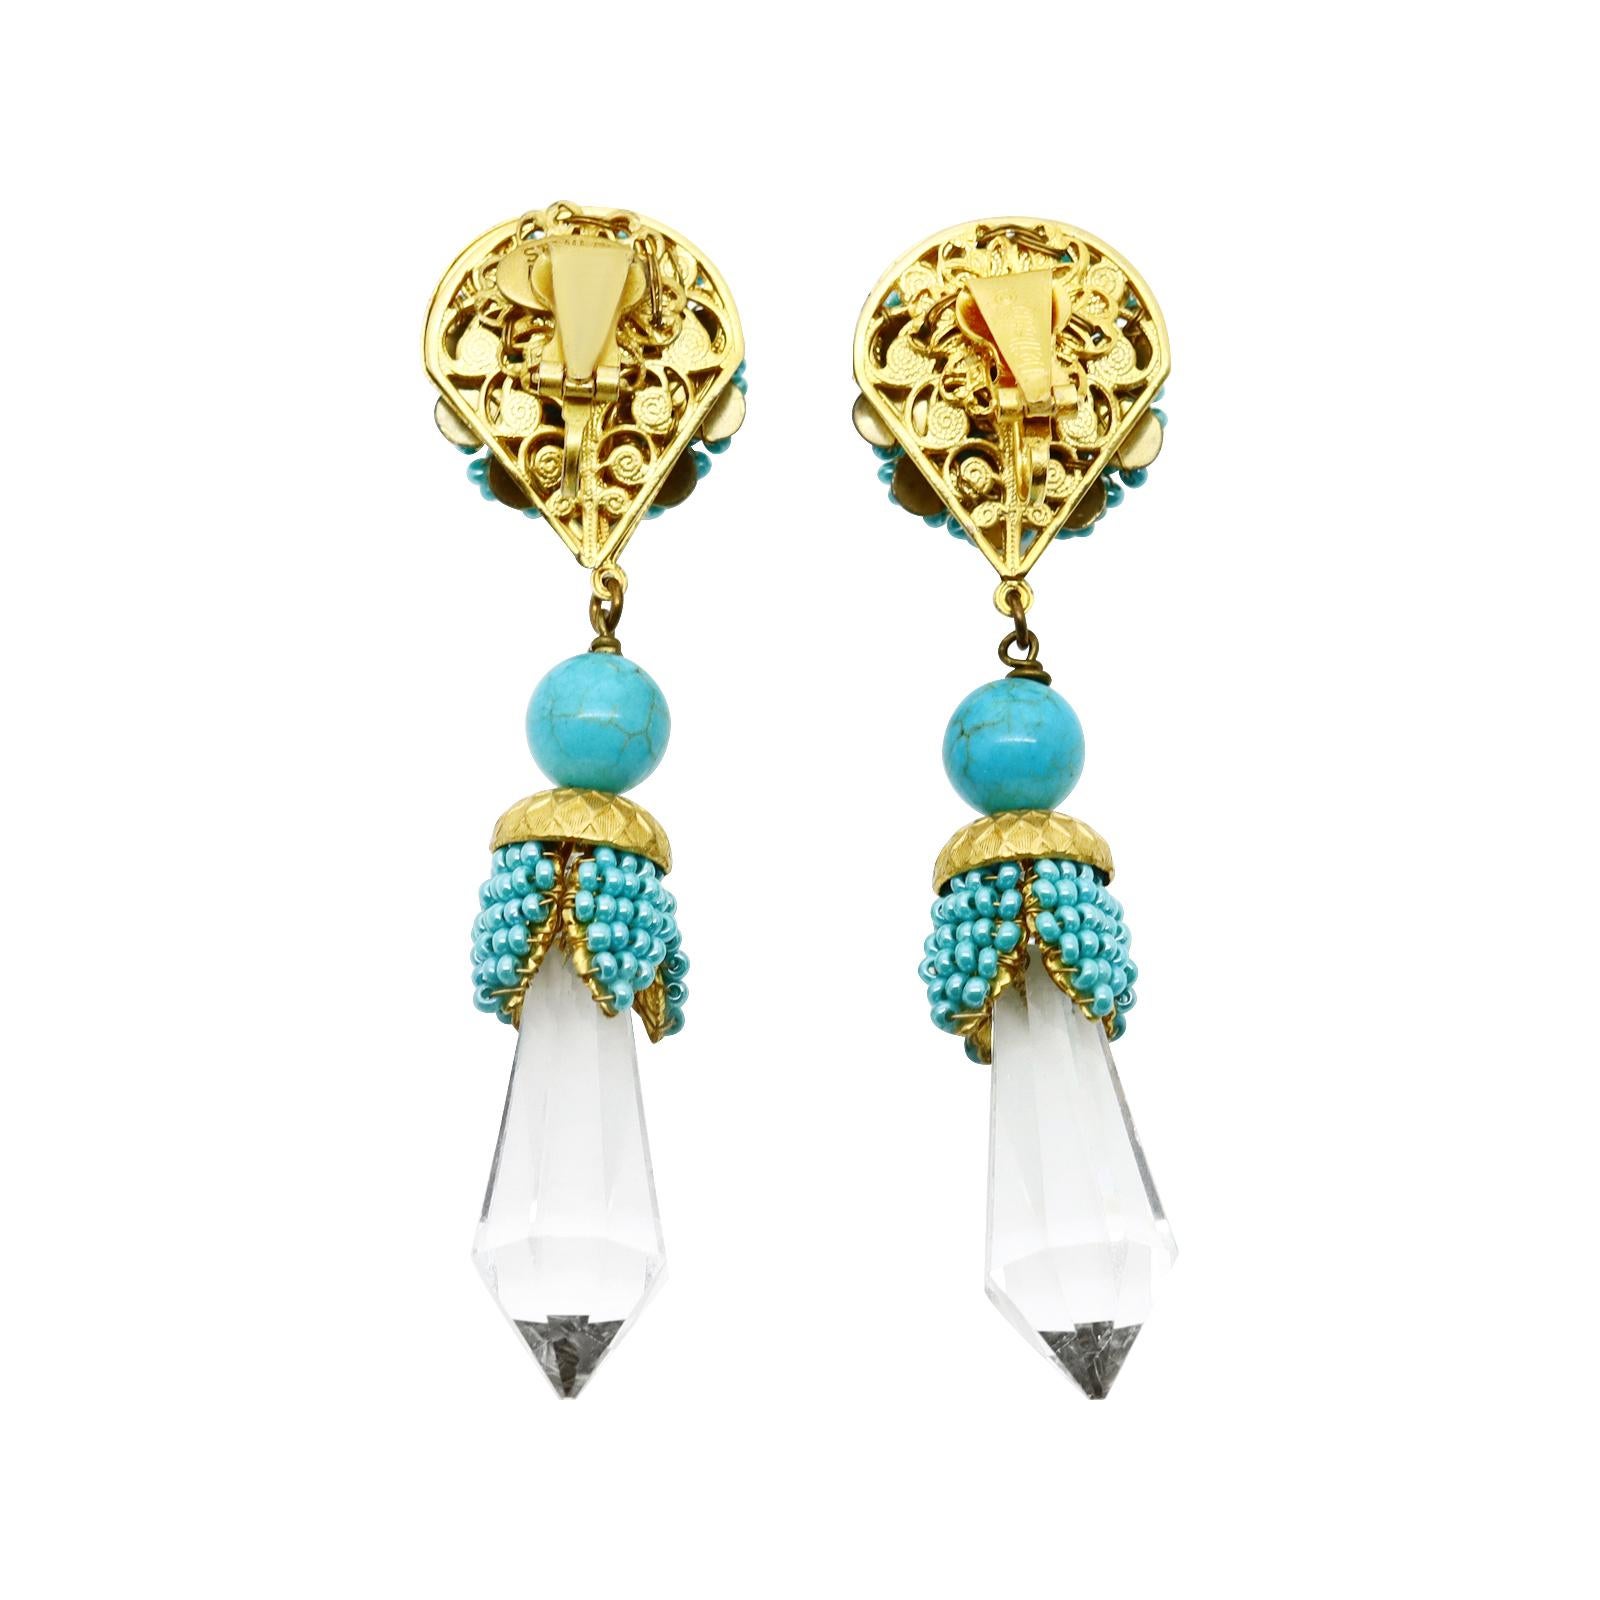 Modern Vintage Stanley Hagler Faux Turquoise Dangling Crystal Earrings Circa 1960s For Sale